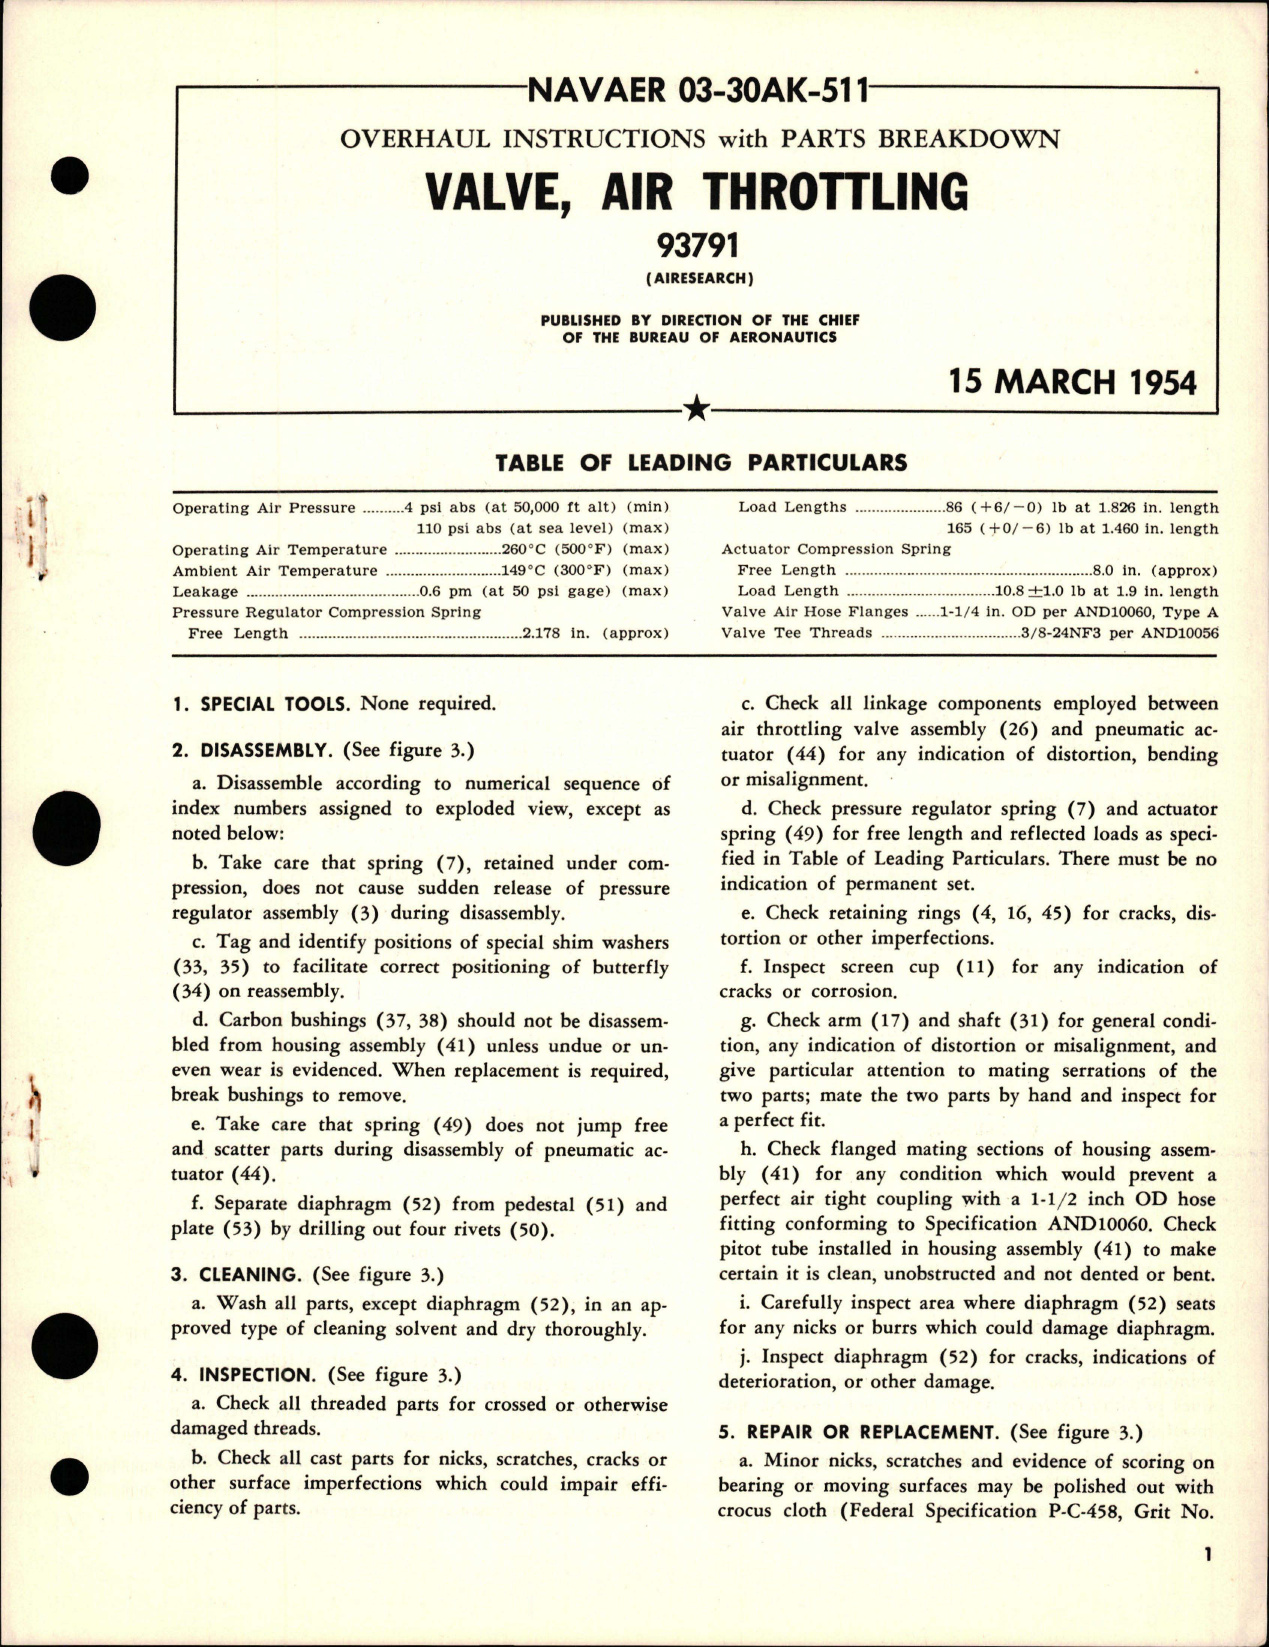 Sample page 1 from AirCorps Library document: Overhaul Instructions with Parts Breakdown for Air Throttling Valve - 93791